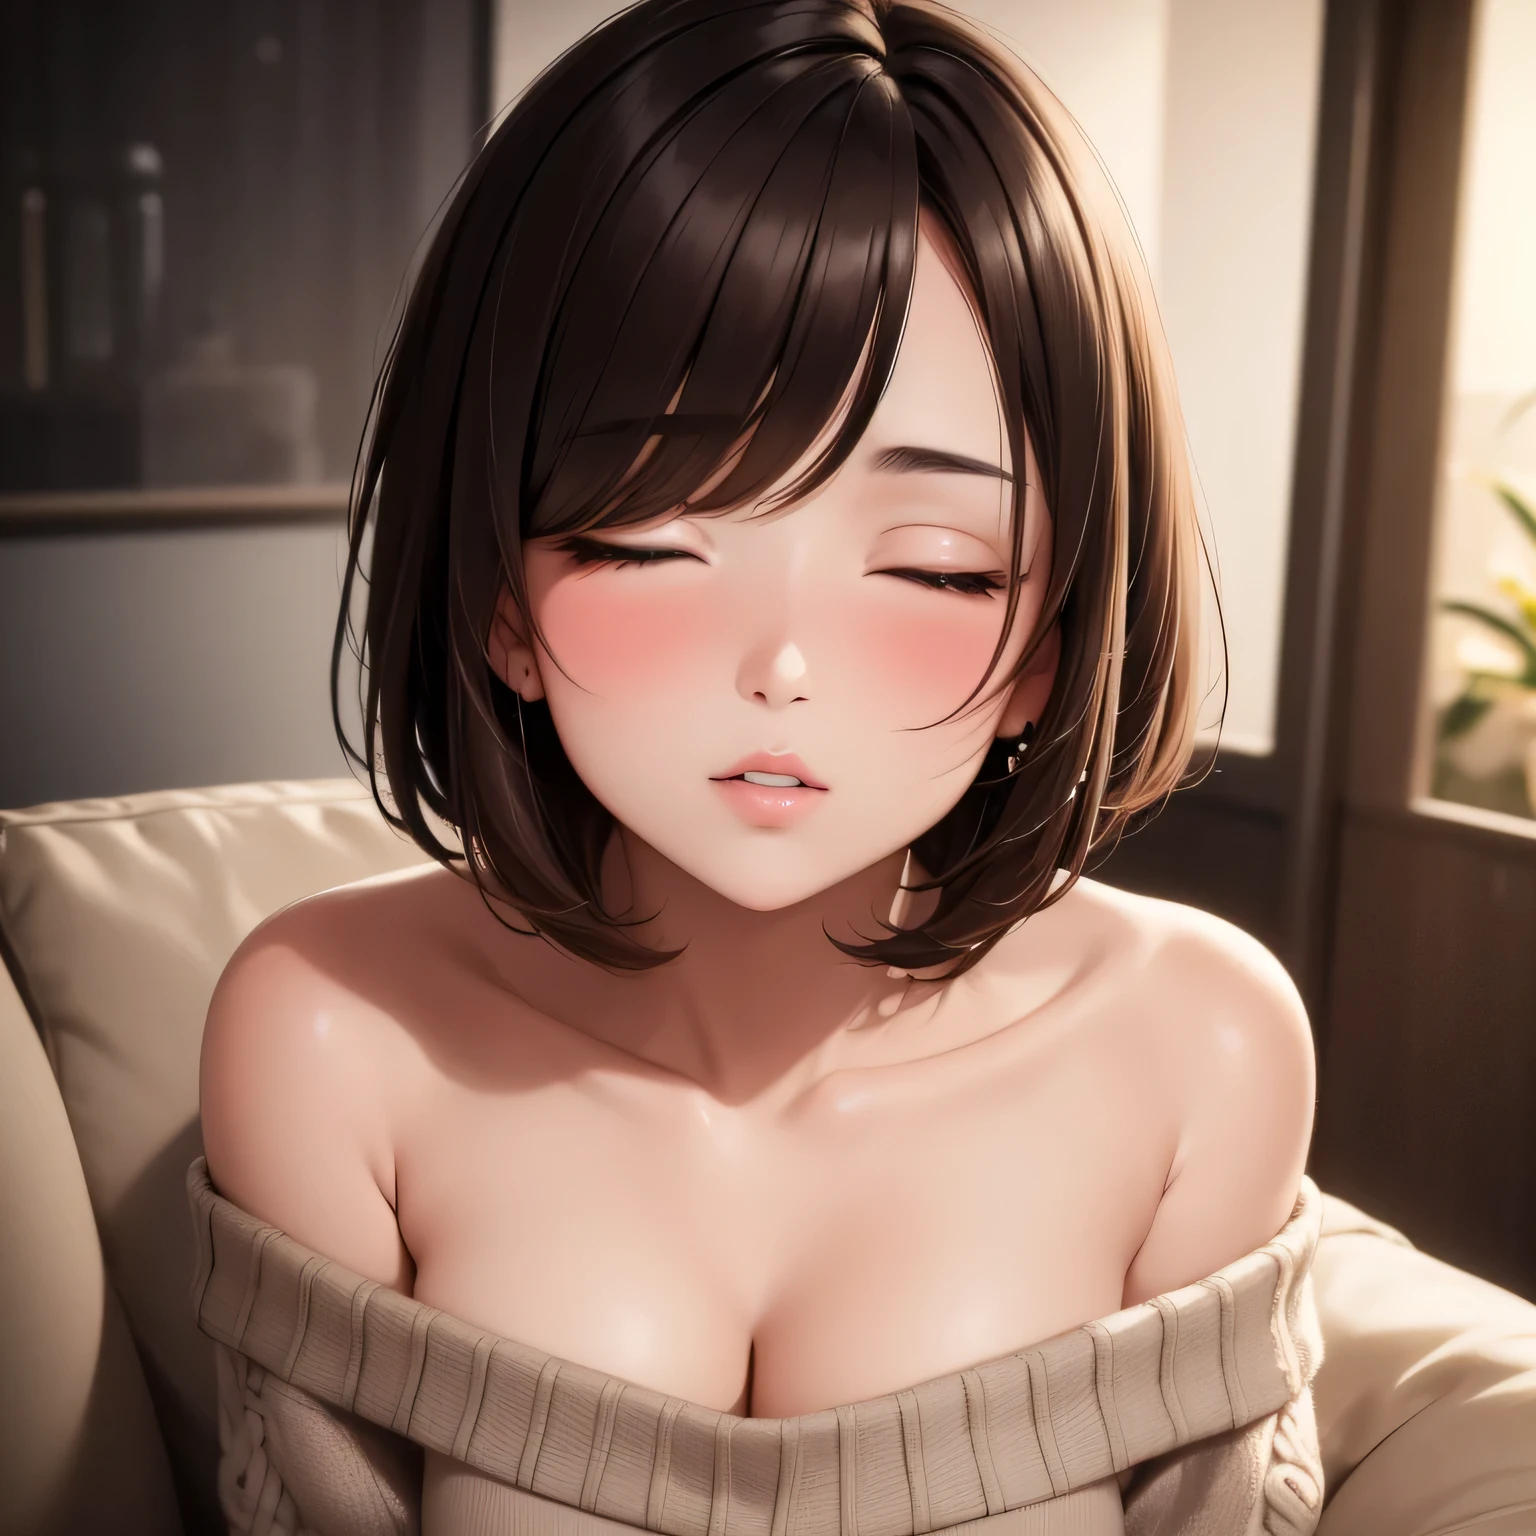 Amazing portrait of a sexy and cute woman who is your best friend's sister who is alone at her  home having a late night gaming session with her brown hair in a short bob style with soft eyes and parted lips with a deep blush wearing an off shoulder oversized grey sweater sitting on a  couch during night time and it's raining outside with warm lighting inside